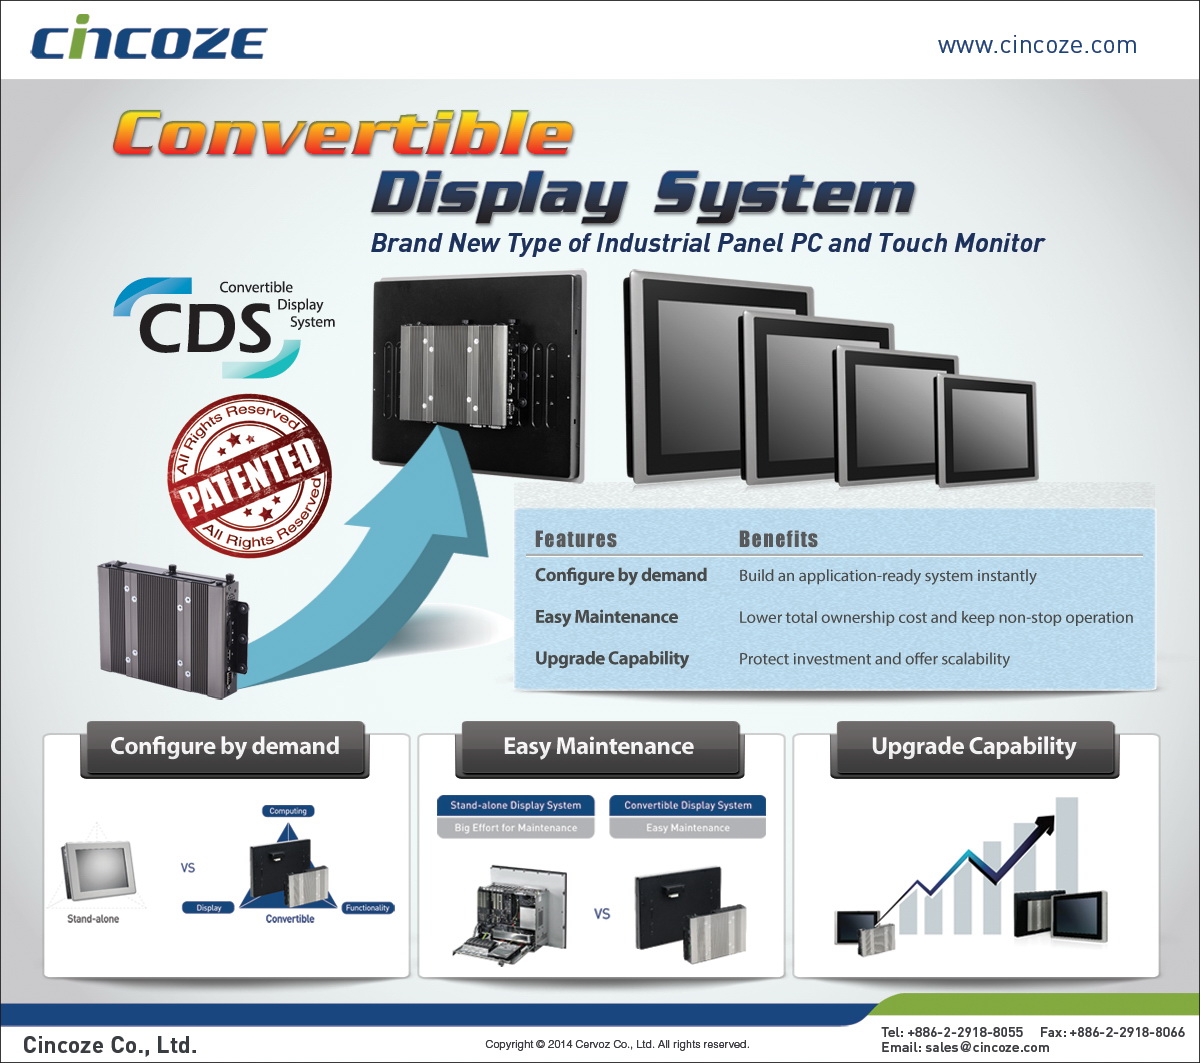 Cincoze Convertible Display System (CDS)